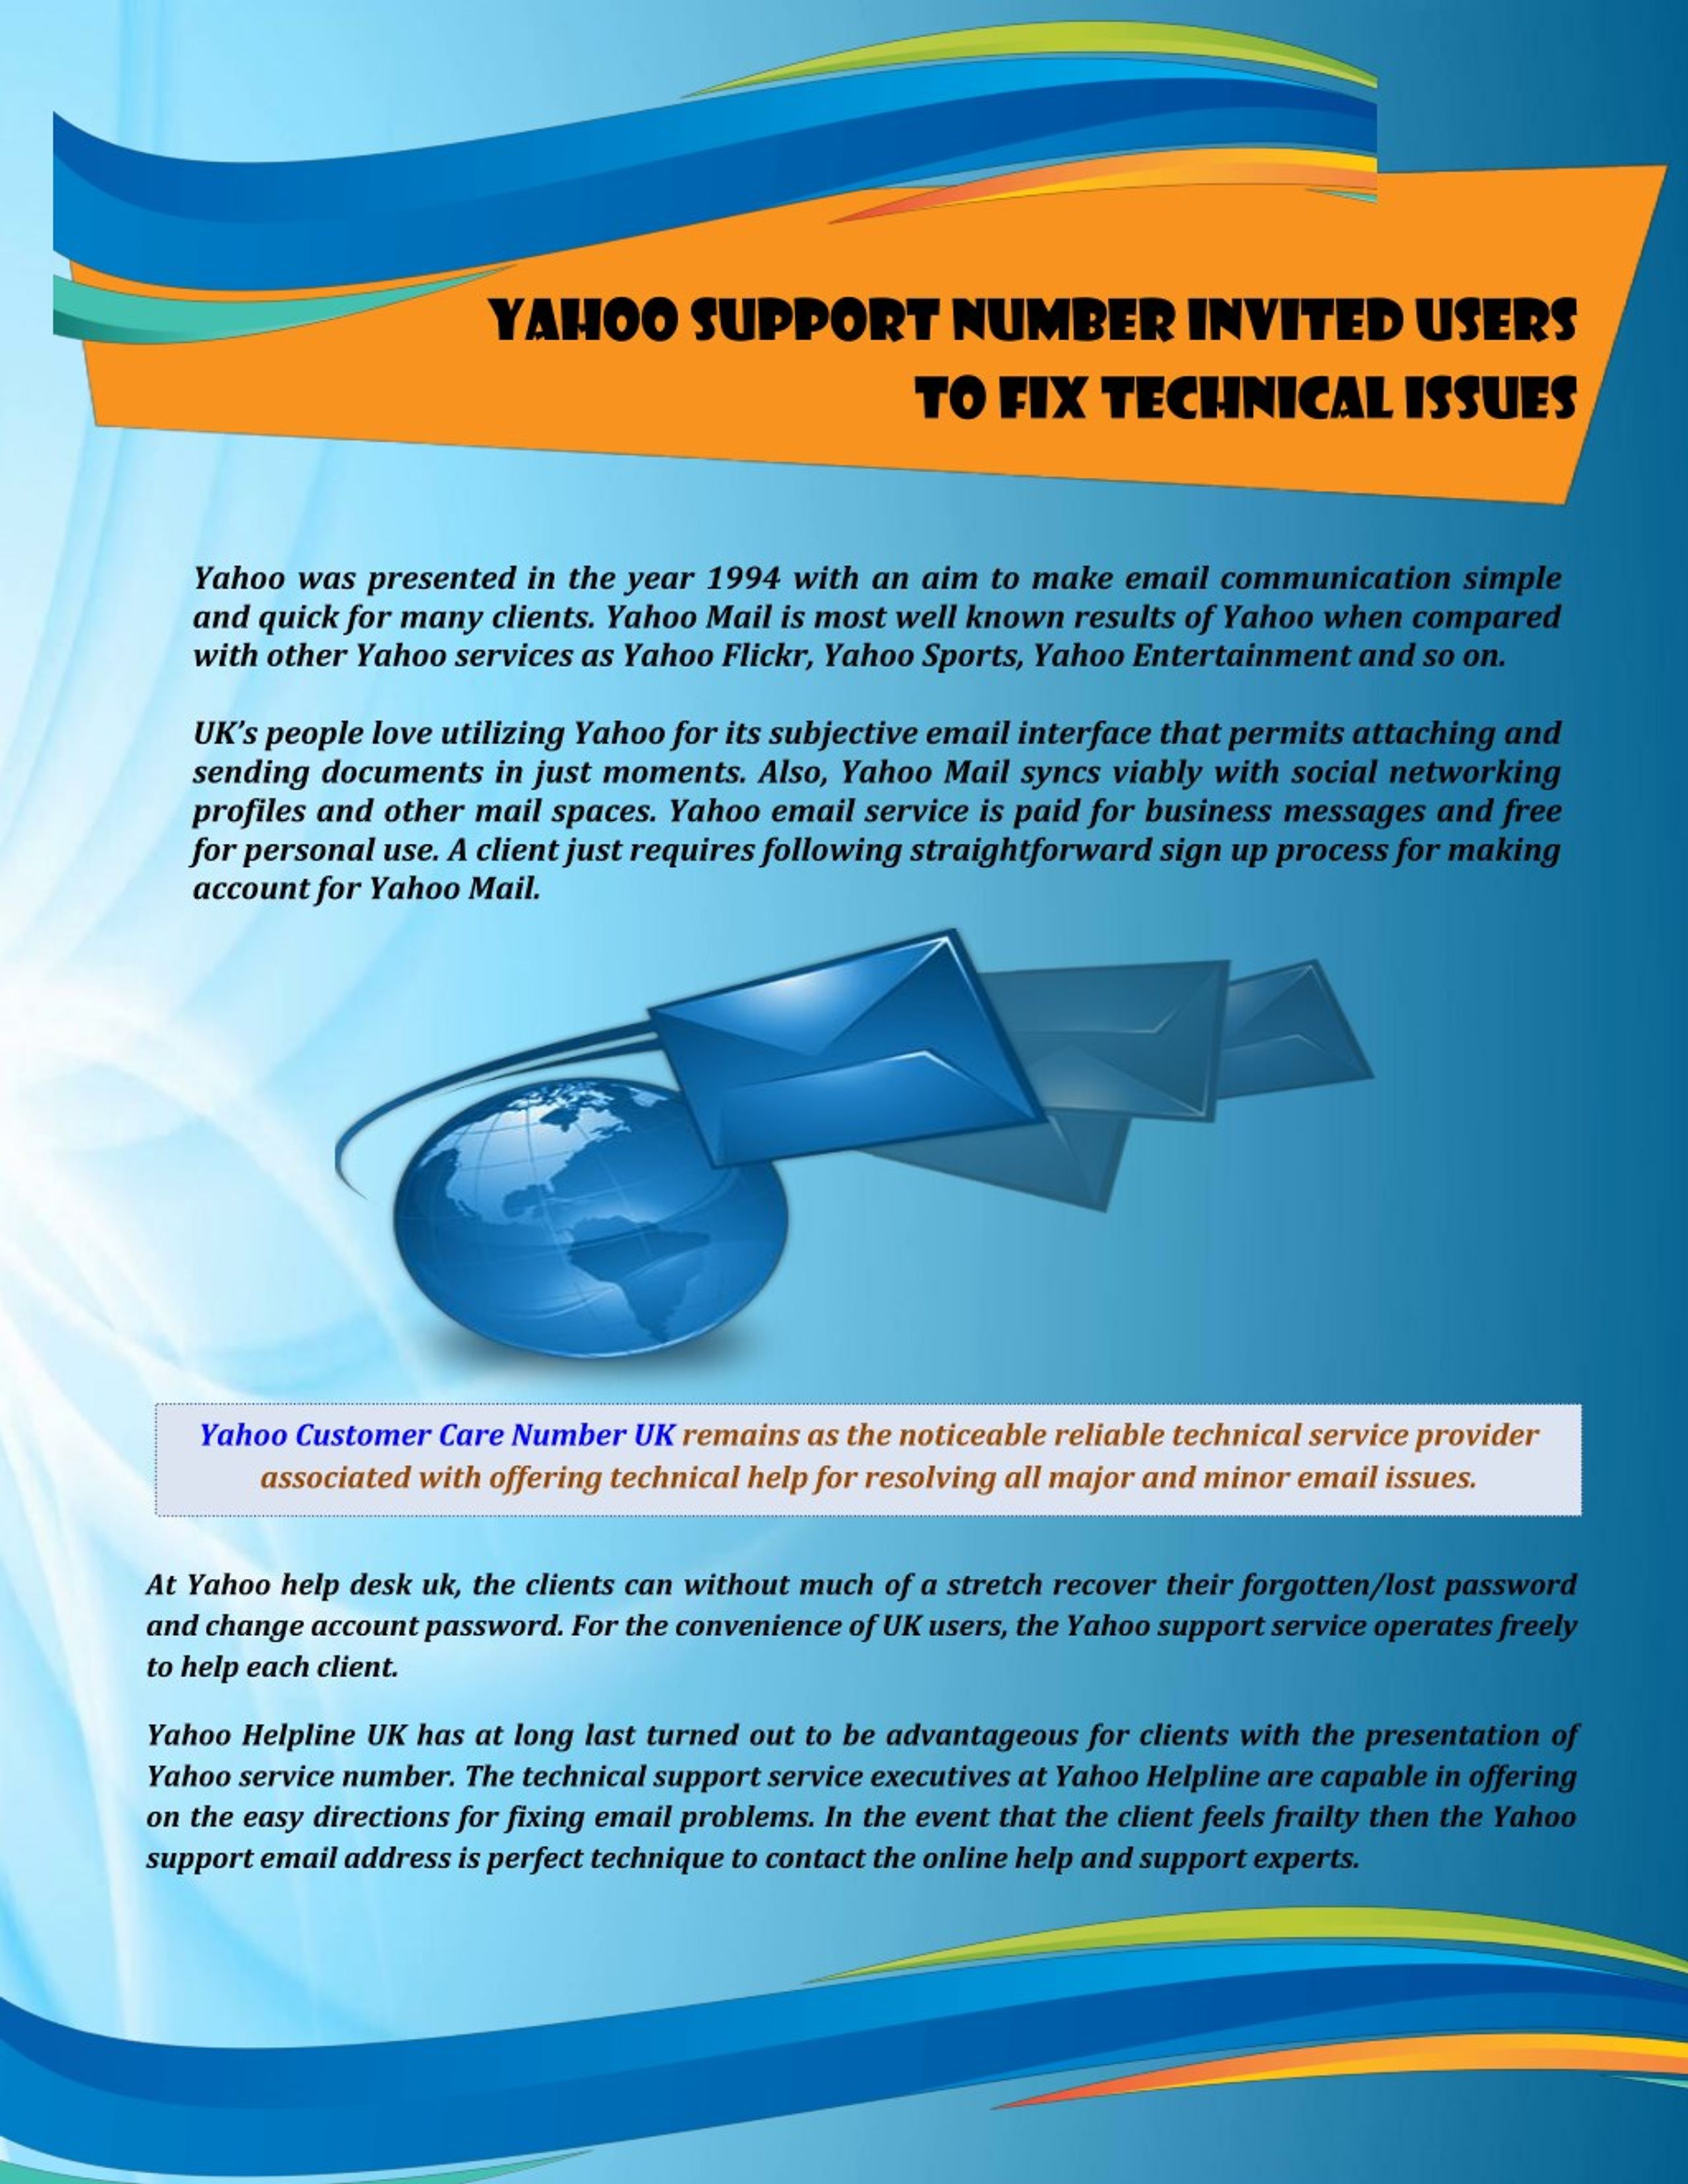 Ppt Yahoo Support Number To Fix Technical Issues Powerpoint